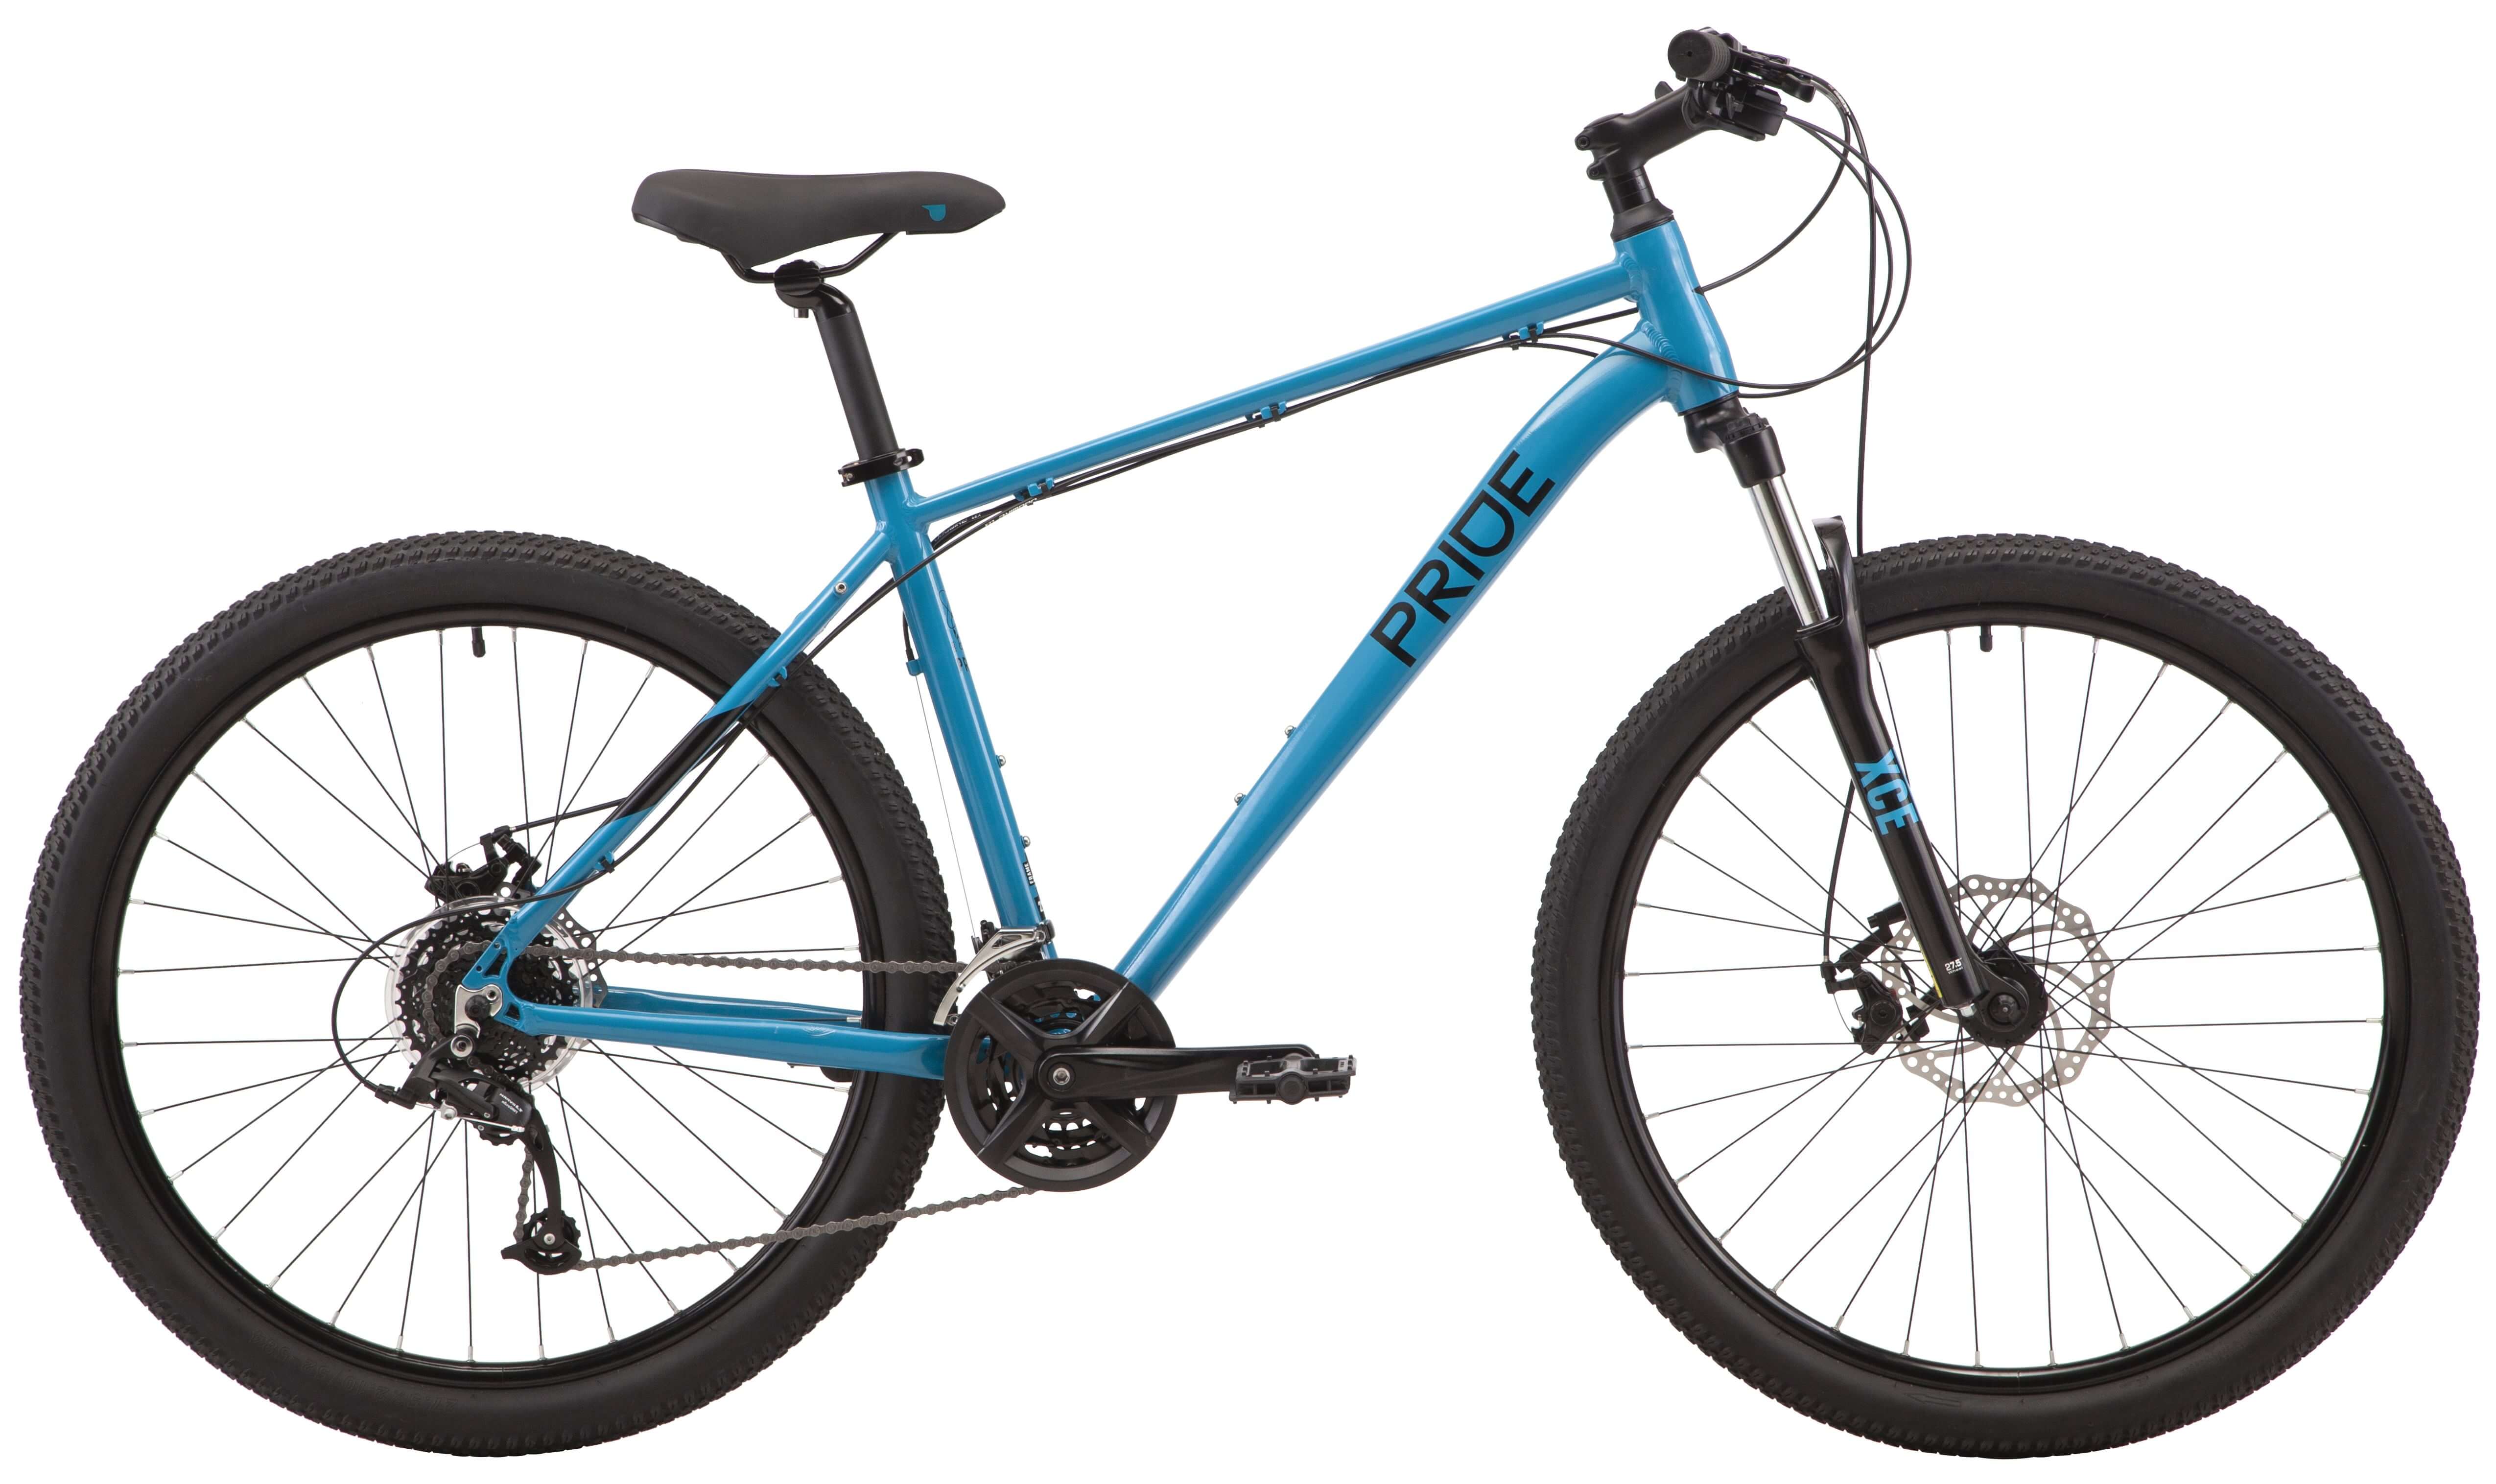 27.5" PRIDE MARVEL 7.2 frame - L 2022 turquoise (rear and front switches and tamnet - Microshift) Photo